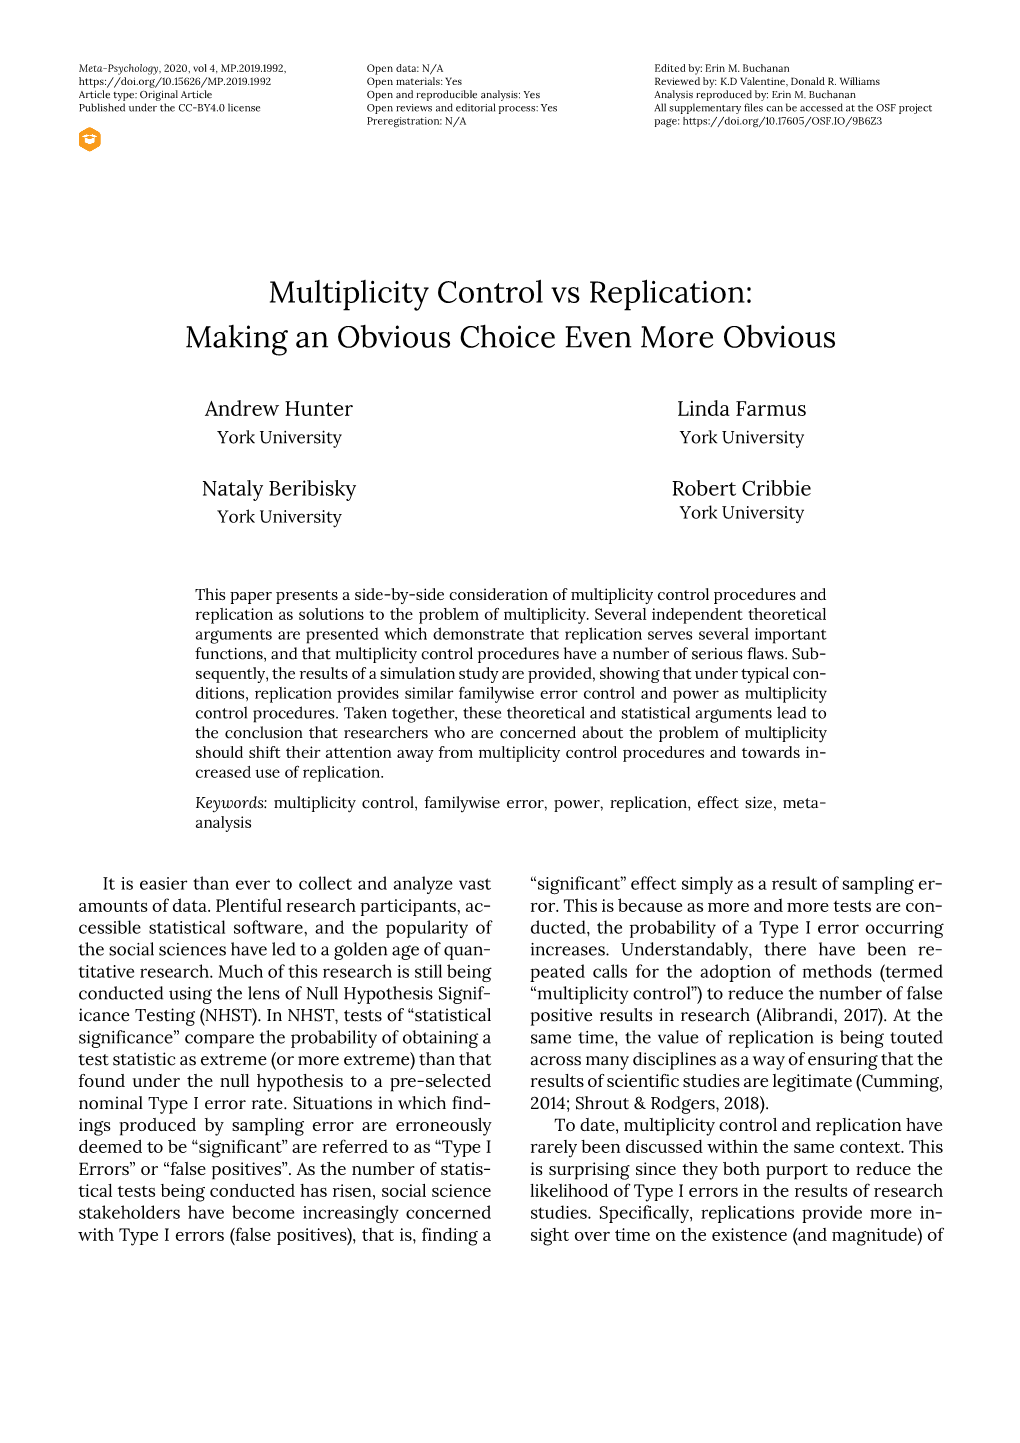 Multiplicity Control Vs Replication: Making an Obvious Choice Even More Obvious